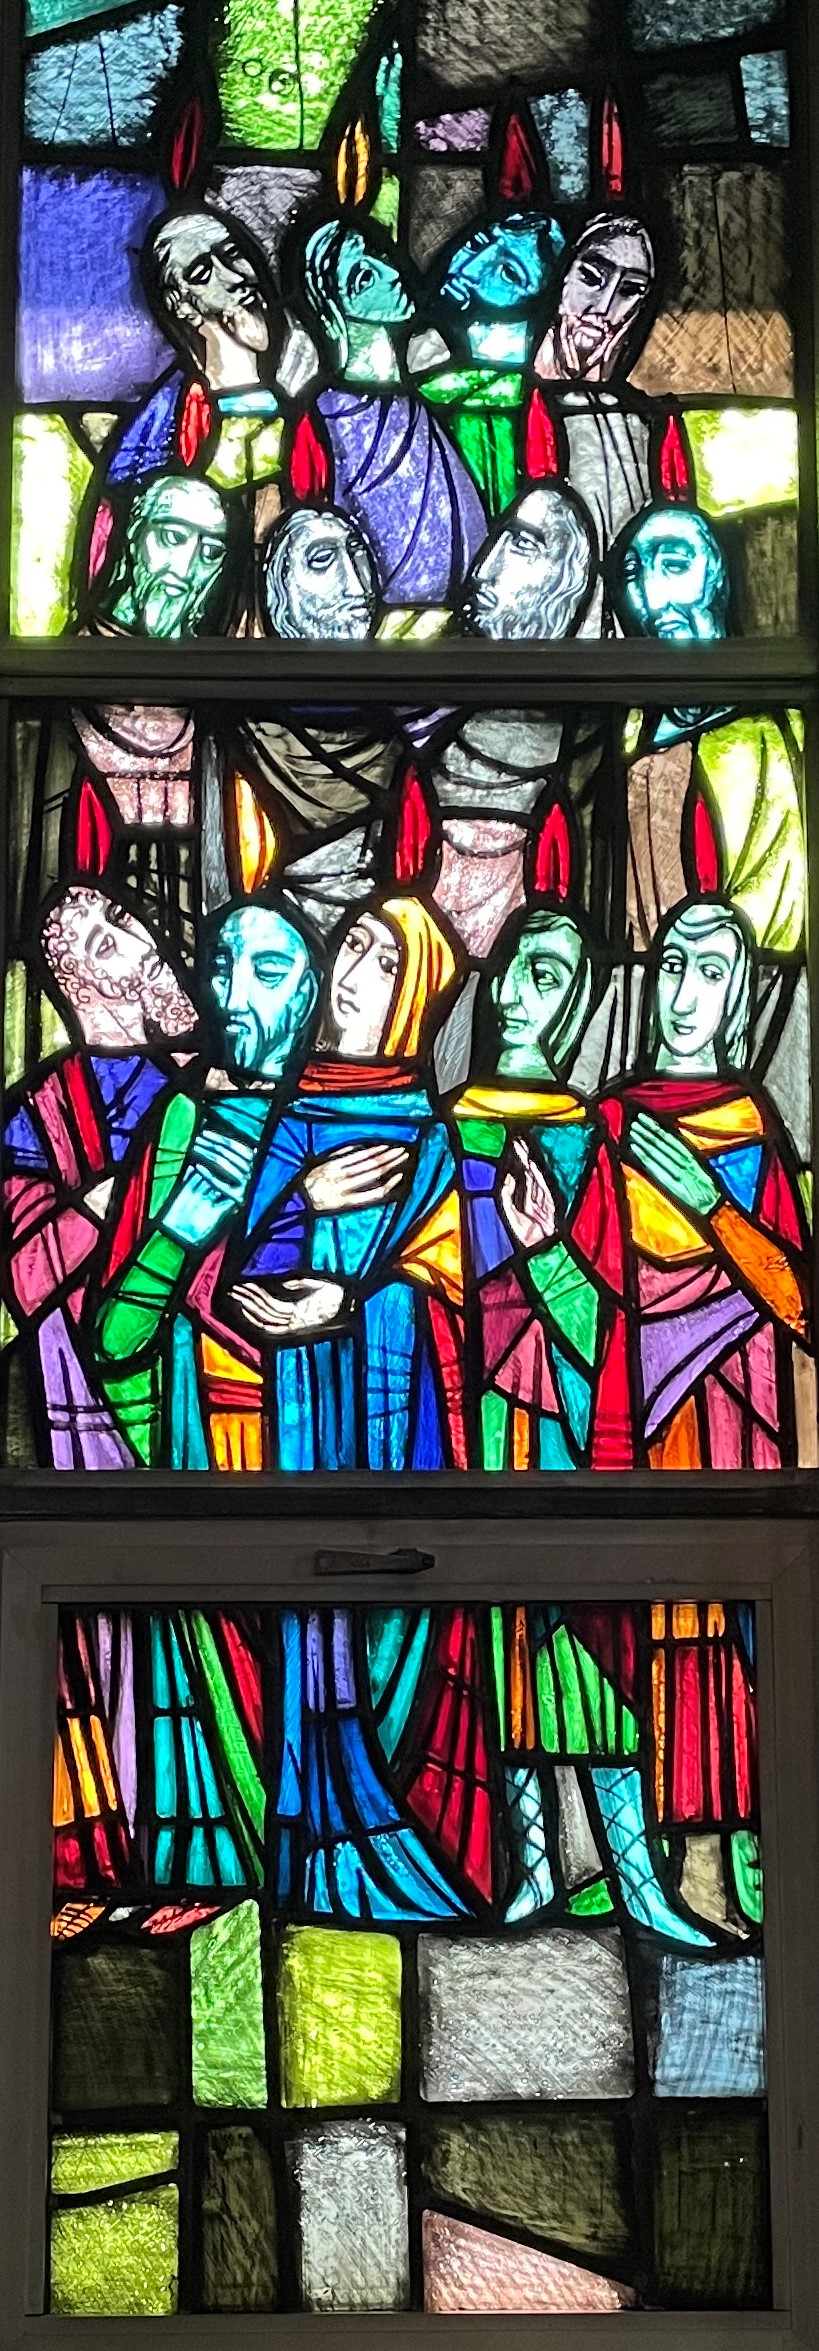 Picture of stained glass window showing the Holy Spirit as tongues of fire on 12 apostles